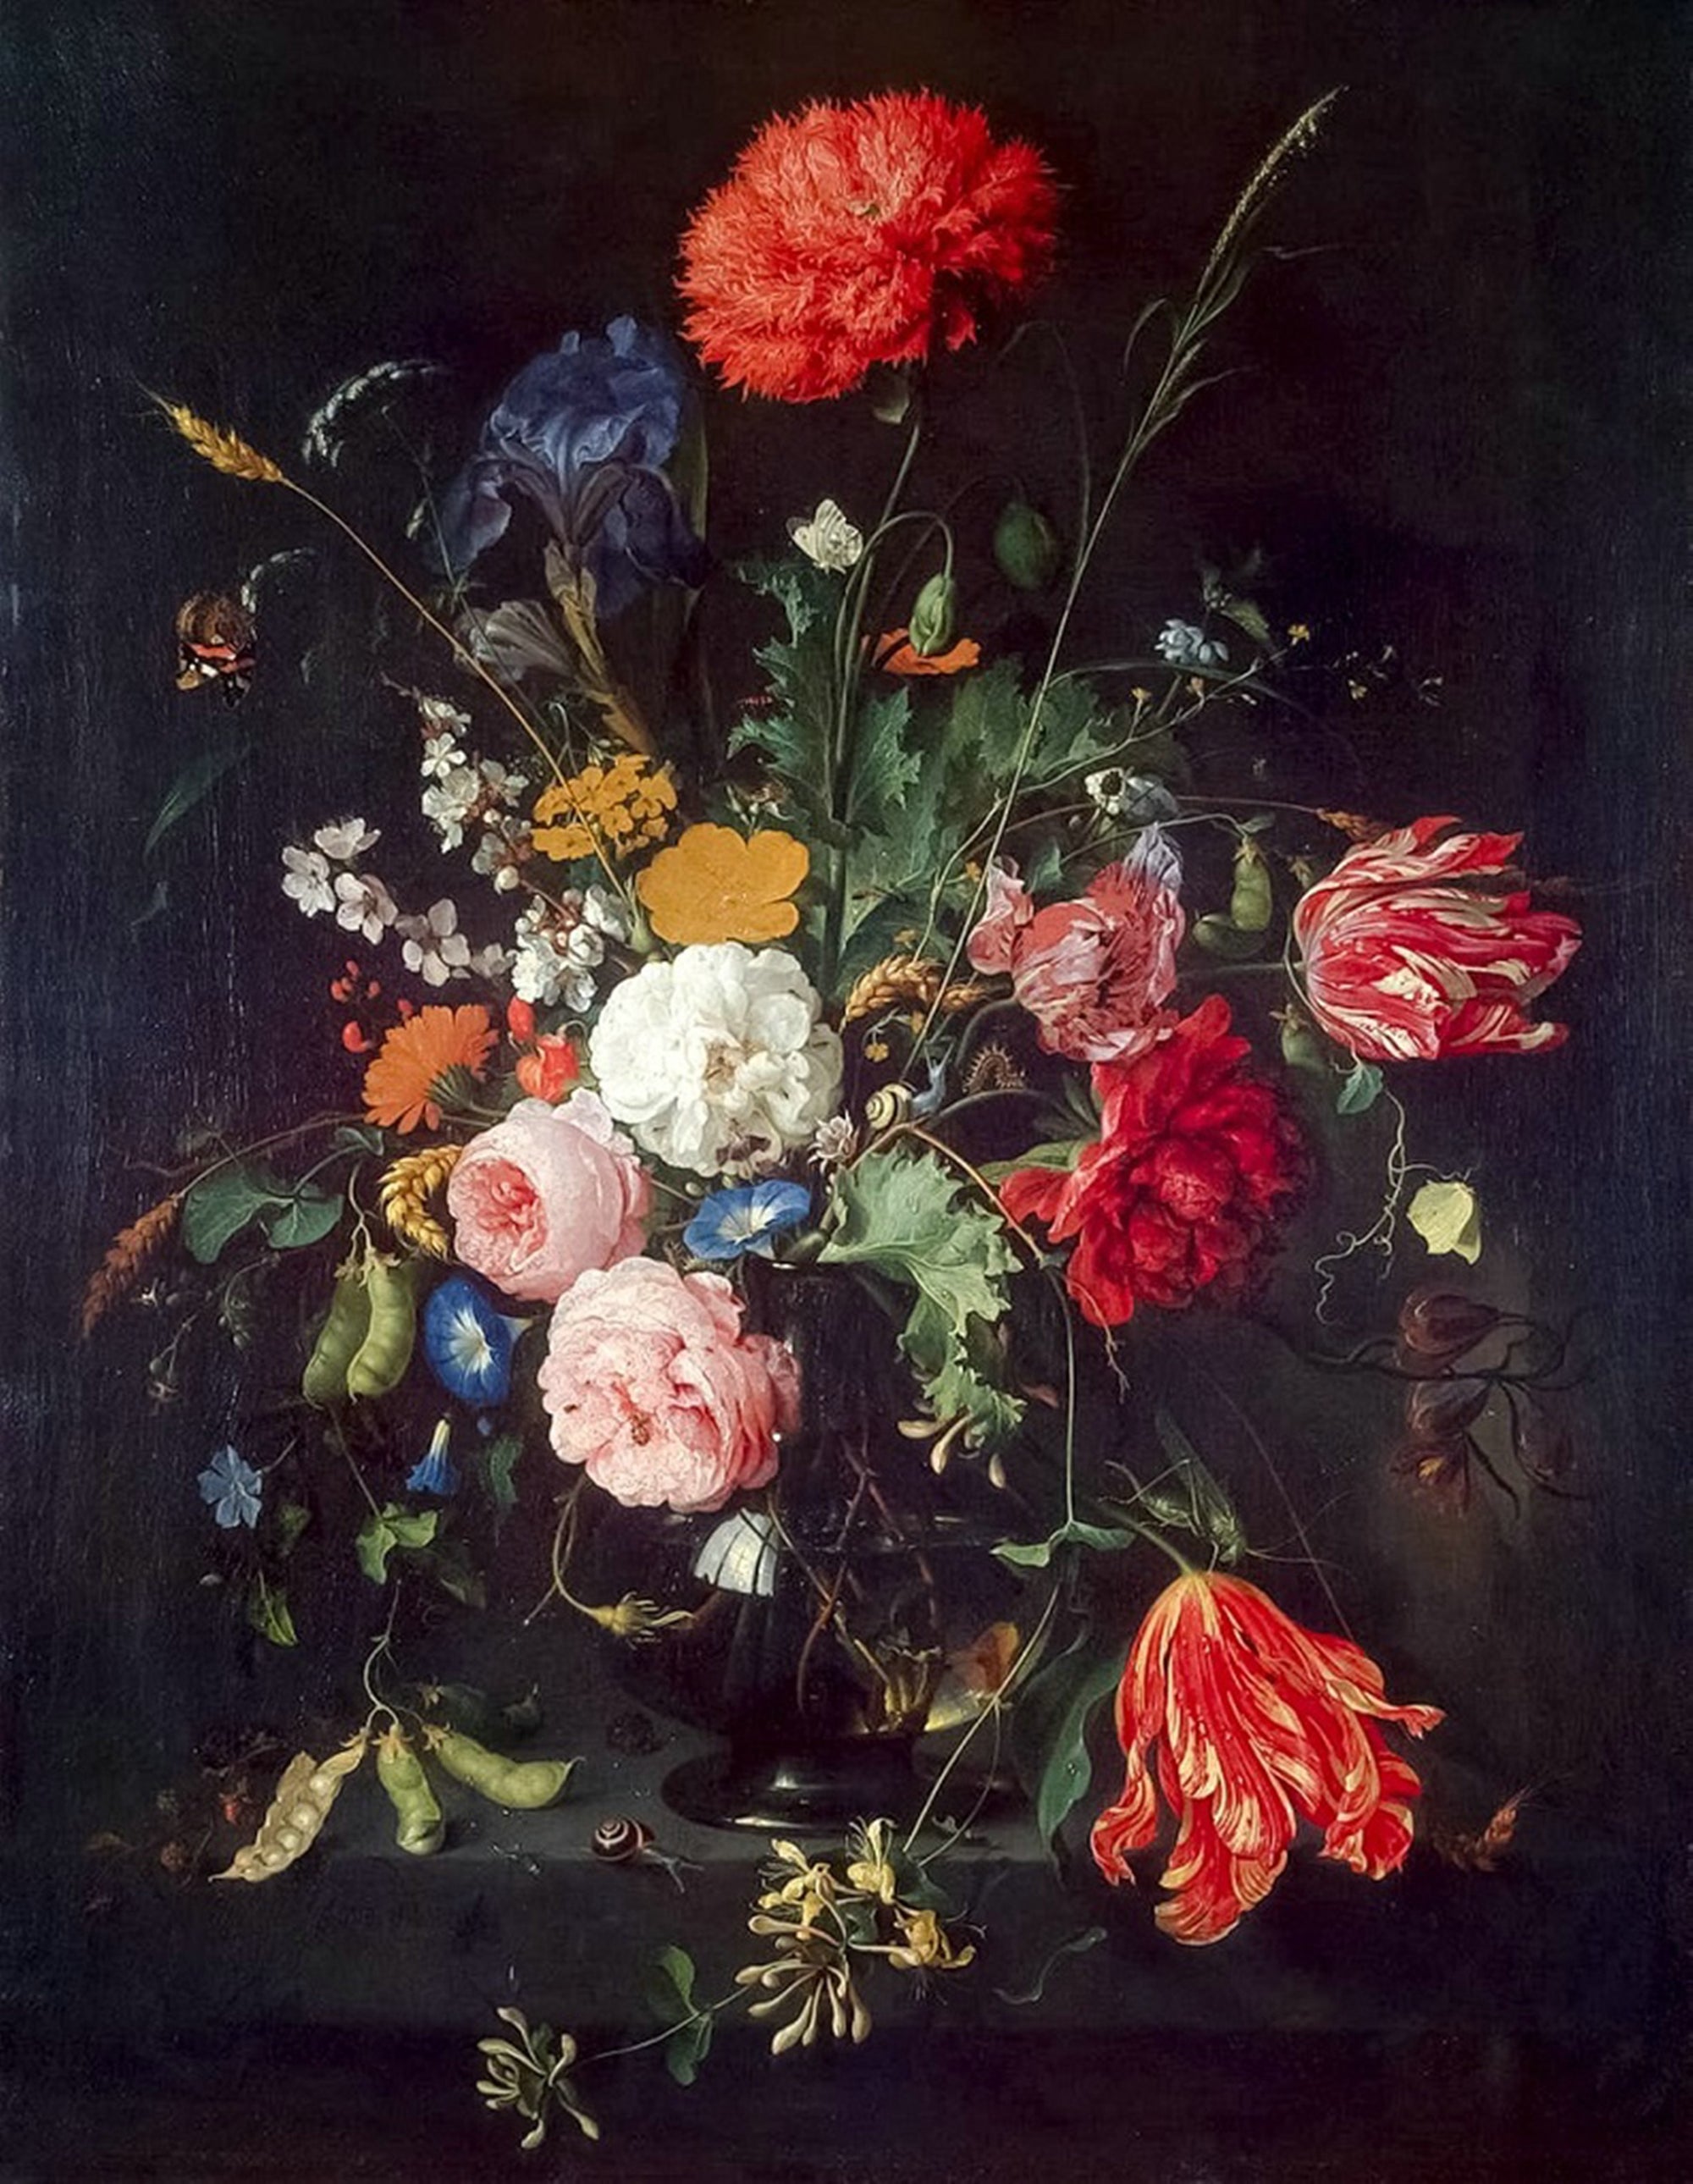 Paint from Jan Davidzoon de Heem showing red pink and white flowers